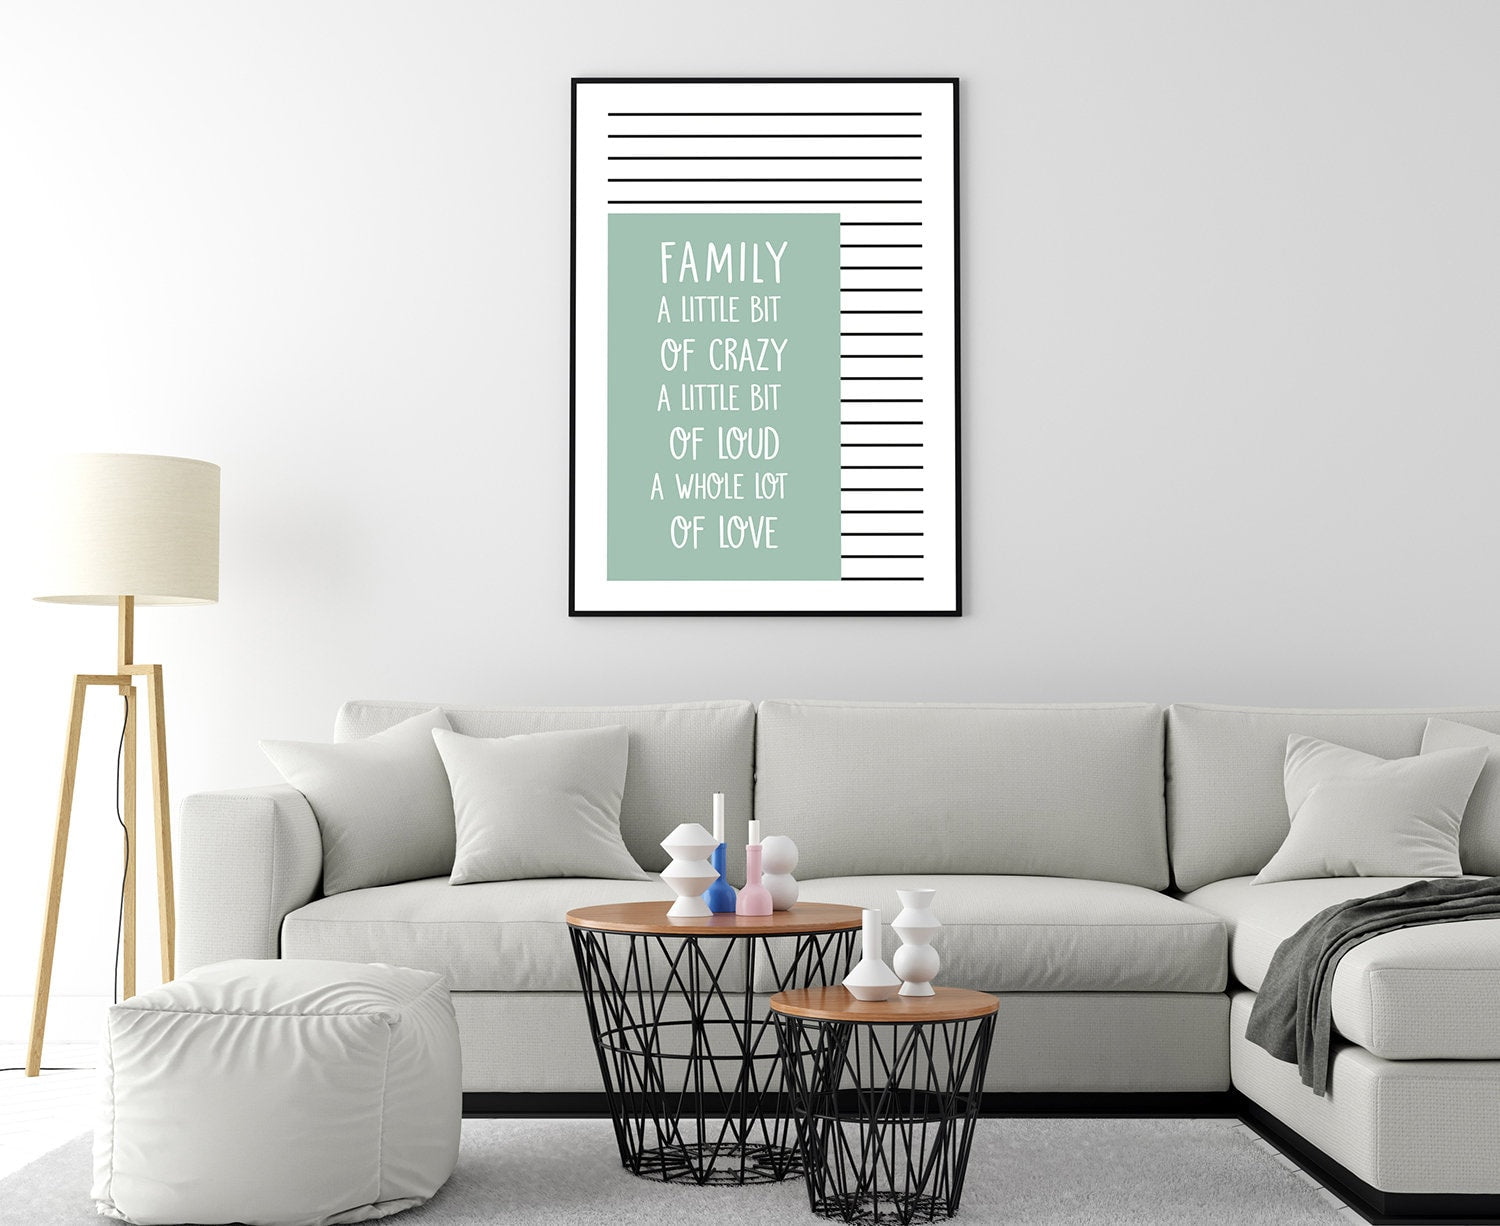 FAMILY a little bit of crazy, Quotes Poster Print